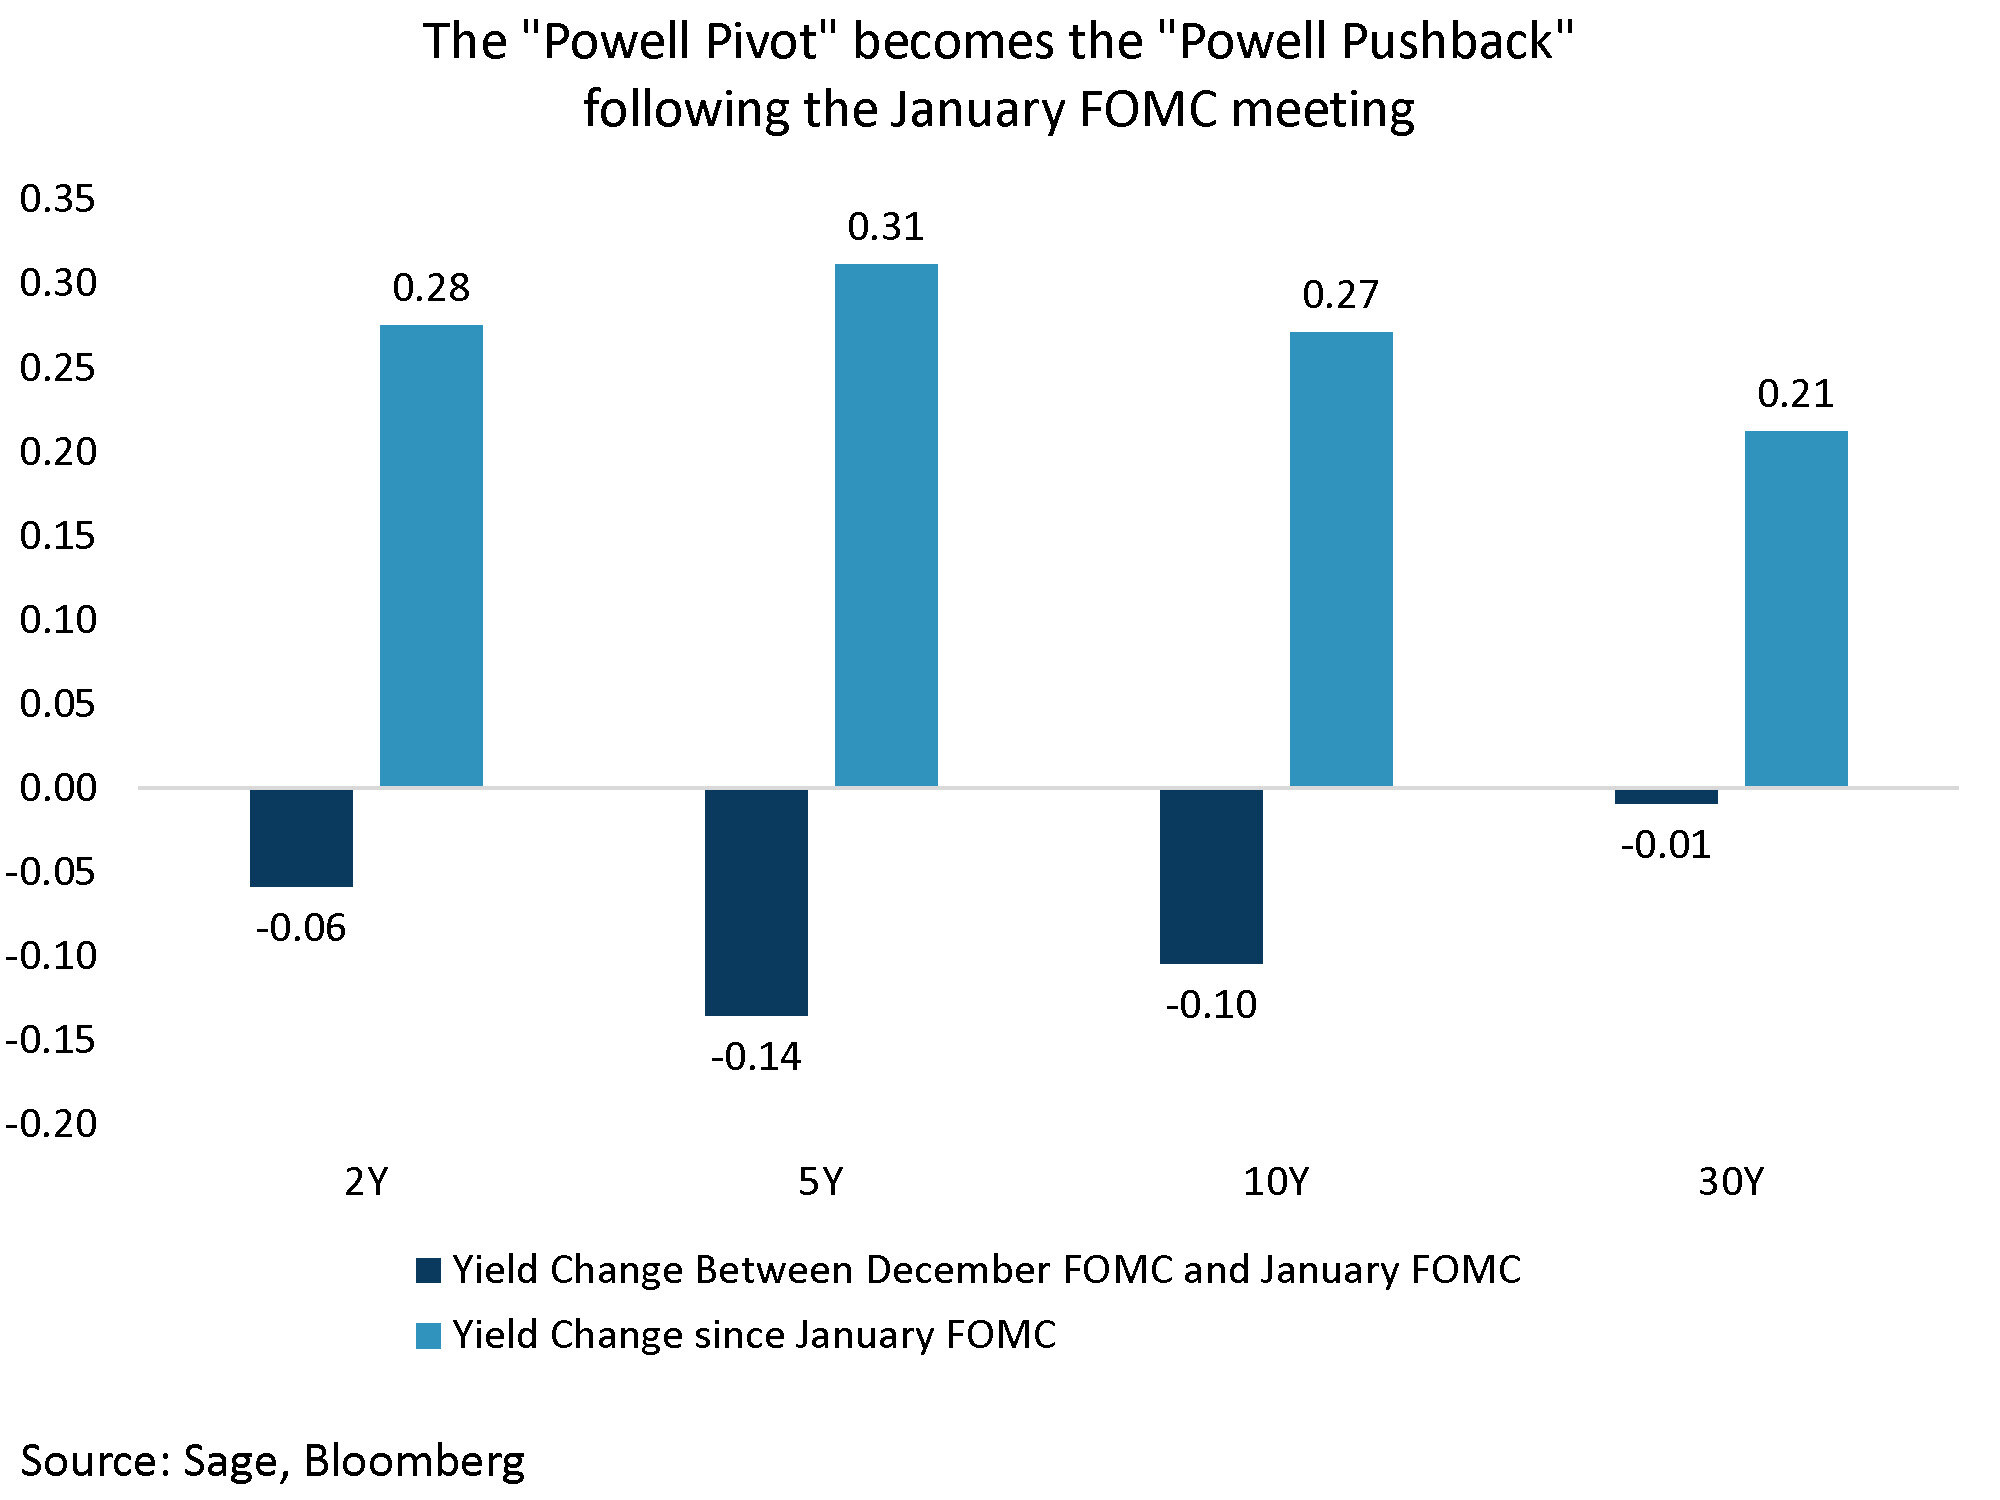 The Powell Pivot become the Powell Pushback following the January FOMC Meeting